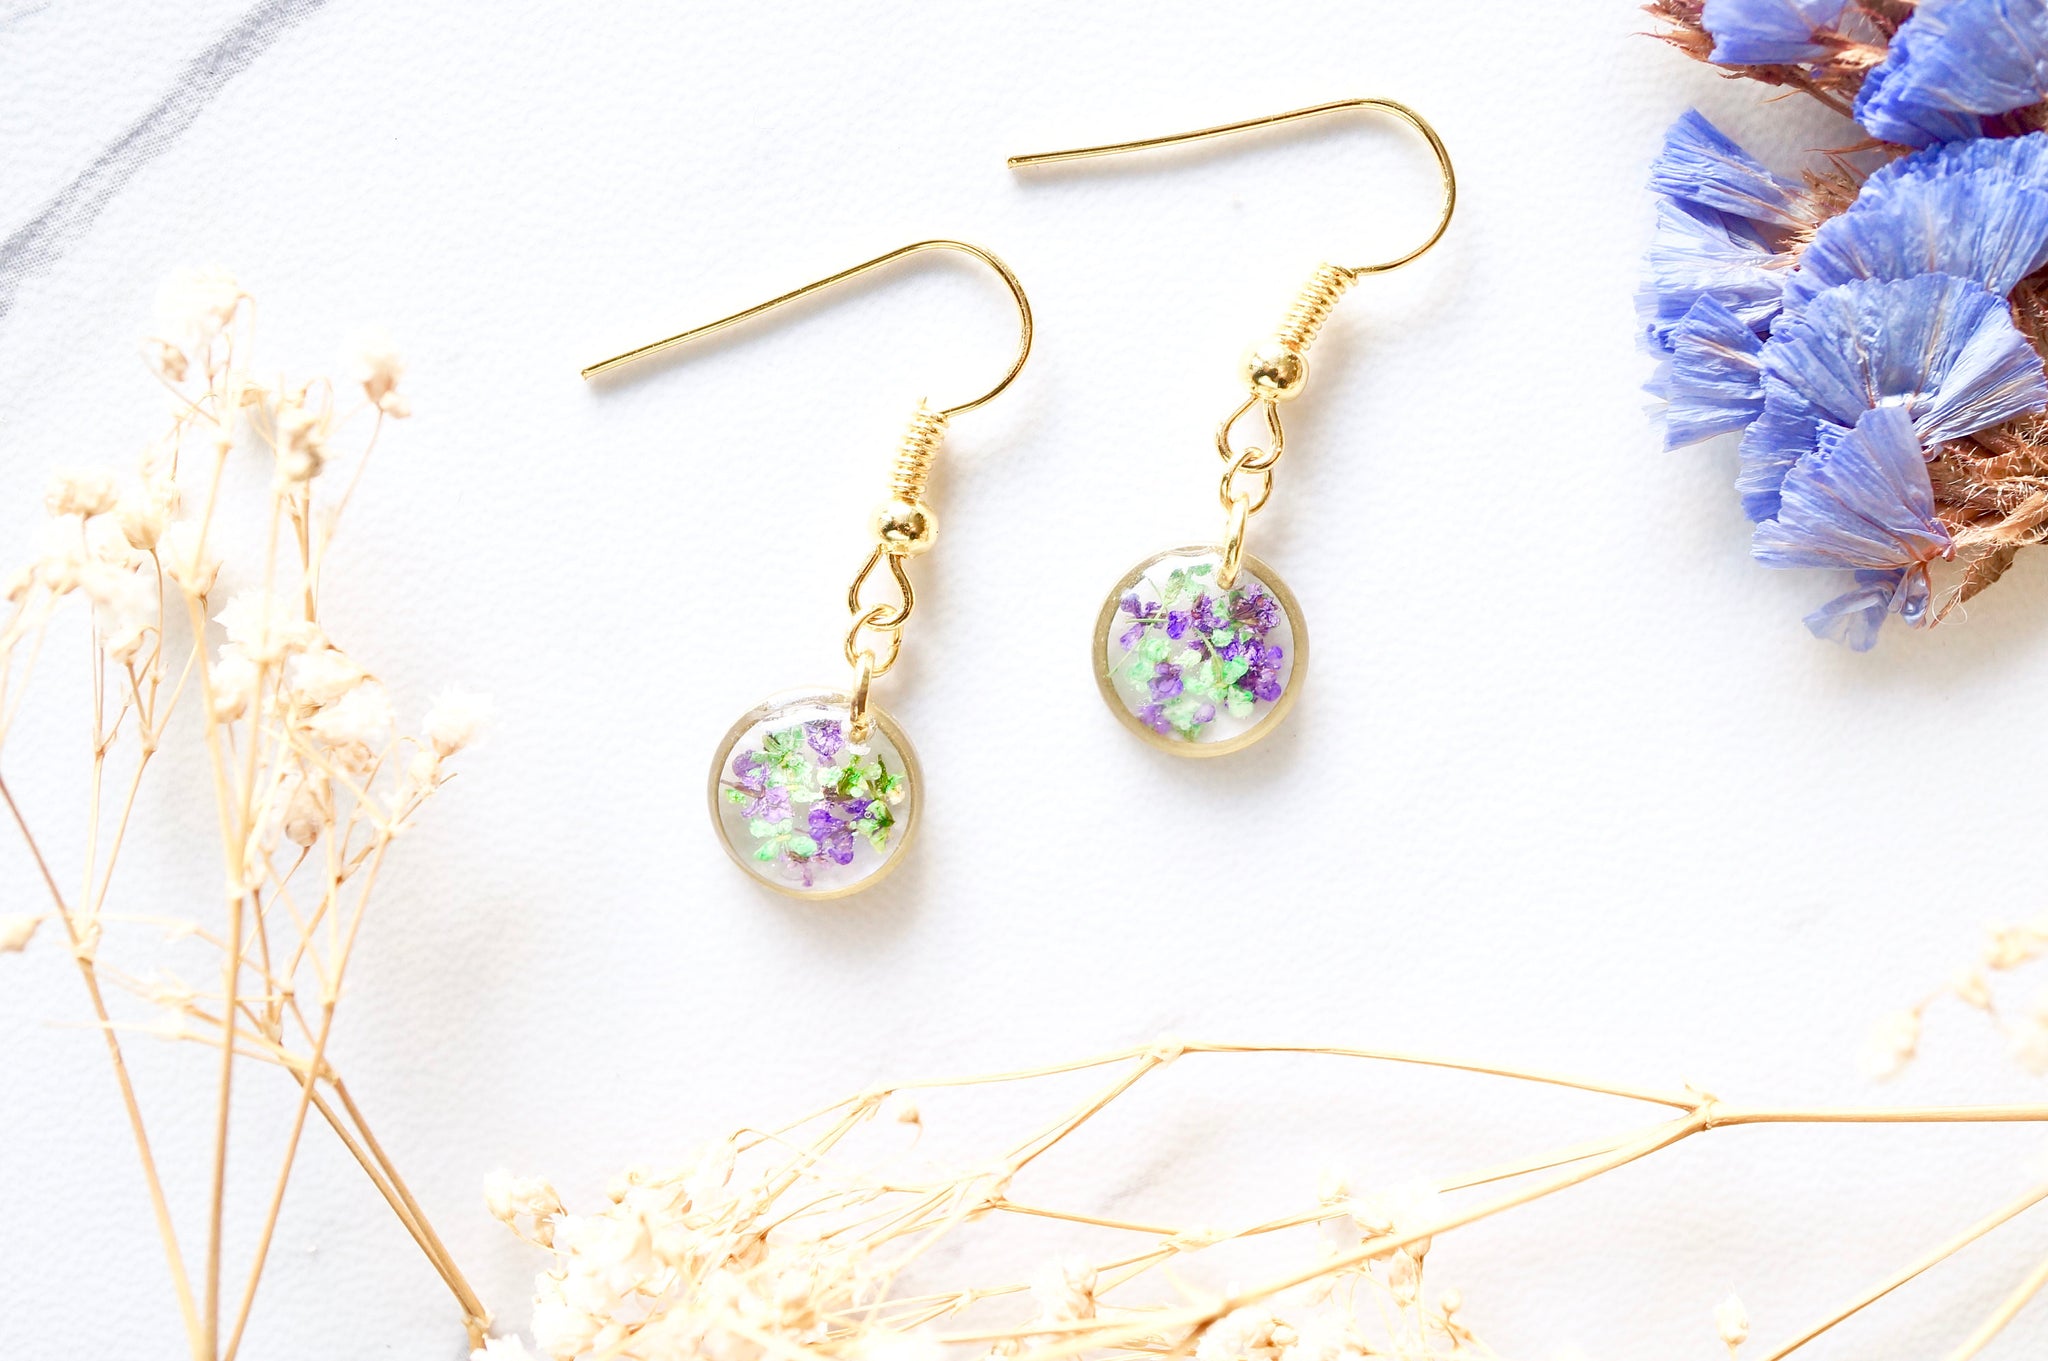 Real Dried Flowers and Resin Earrings, Silver Diamond Drops in